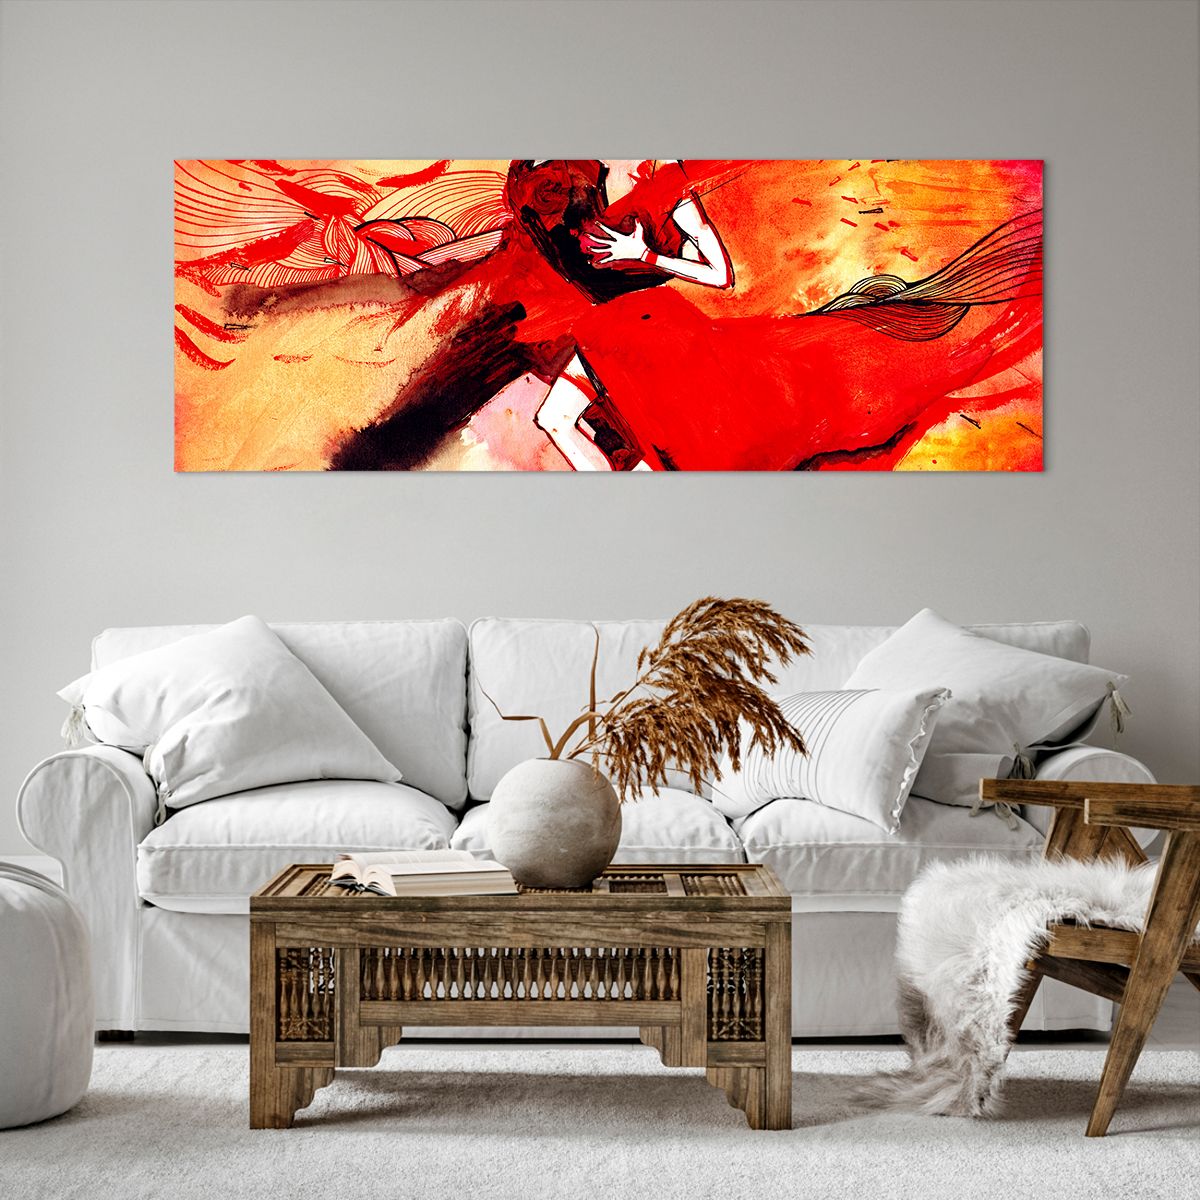 Impression sur toile Abstraction, Impression sur toile Danse, Impression sur toile Tango, Impression sur toile Danseurs, Impression sur toile Art